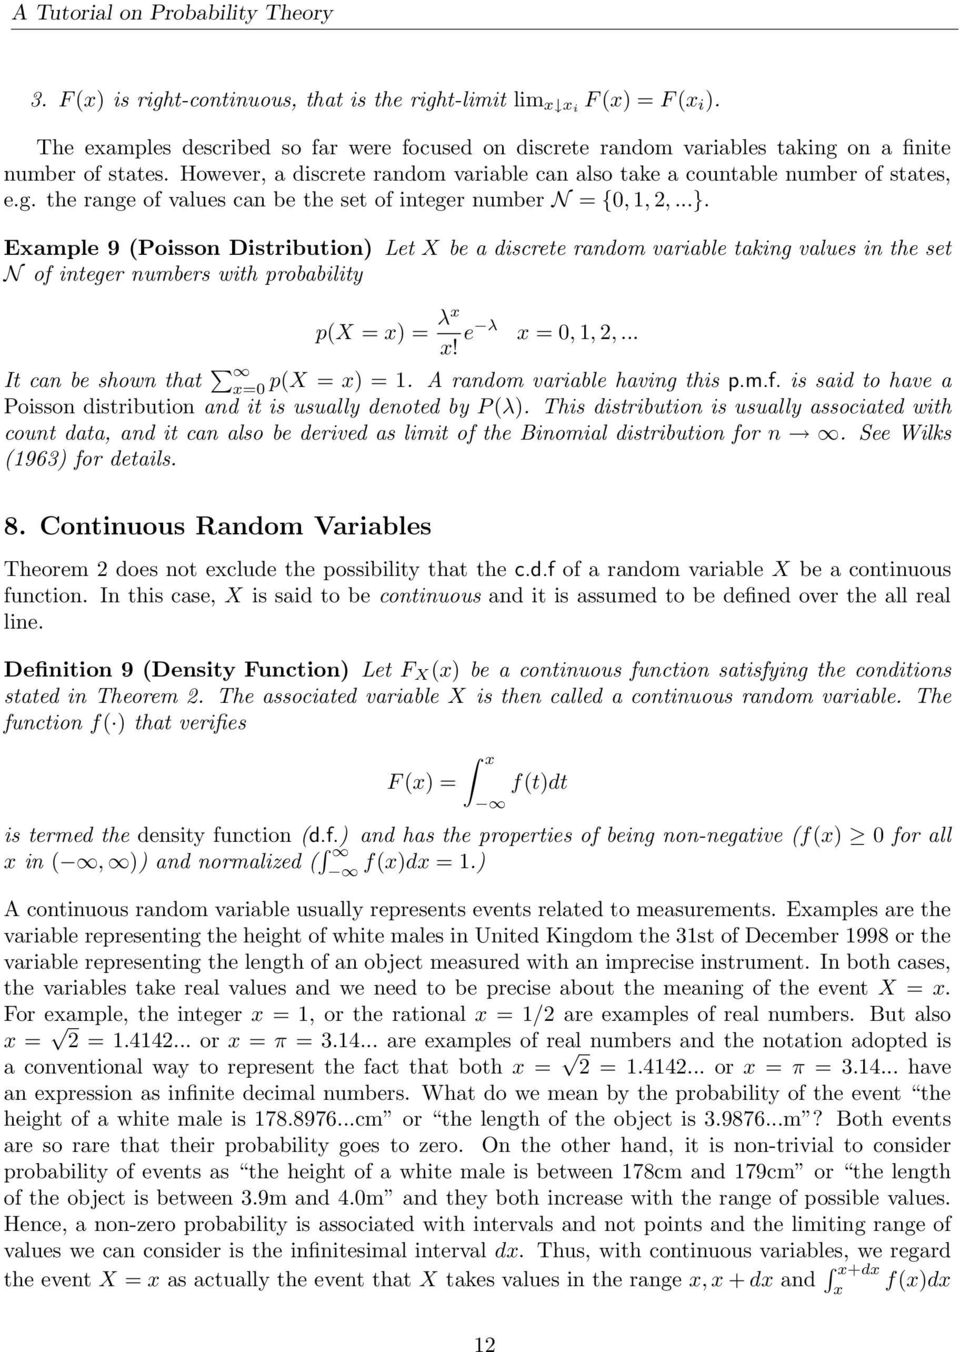 Example 9 (Poisson Distribution) Let X be a discrete random variable taking values in the set N of integer numbers with probability p(x = x) = λx x! e λ x = 0, 1, 2,.